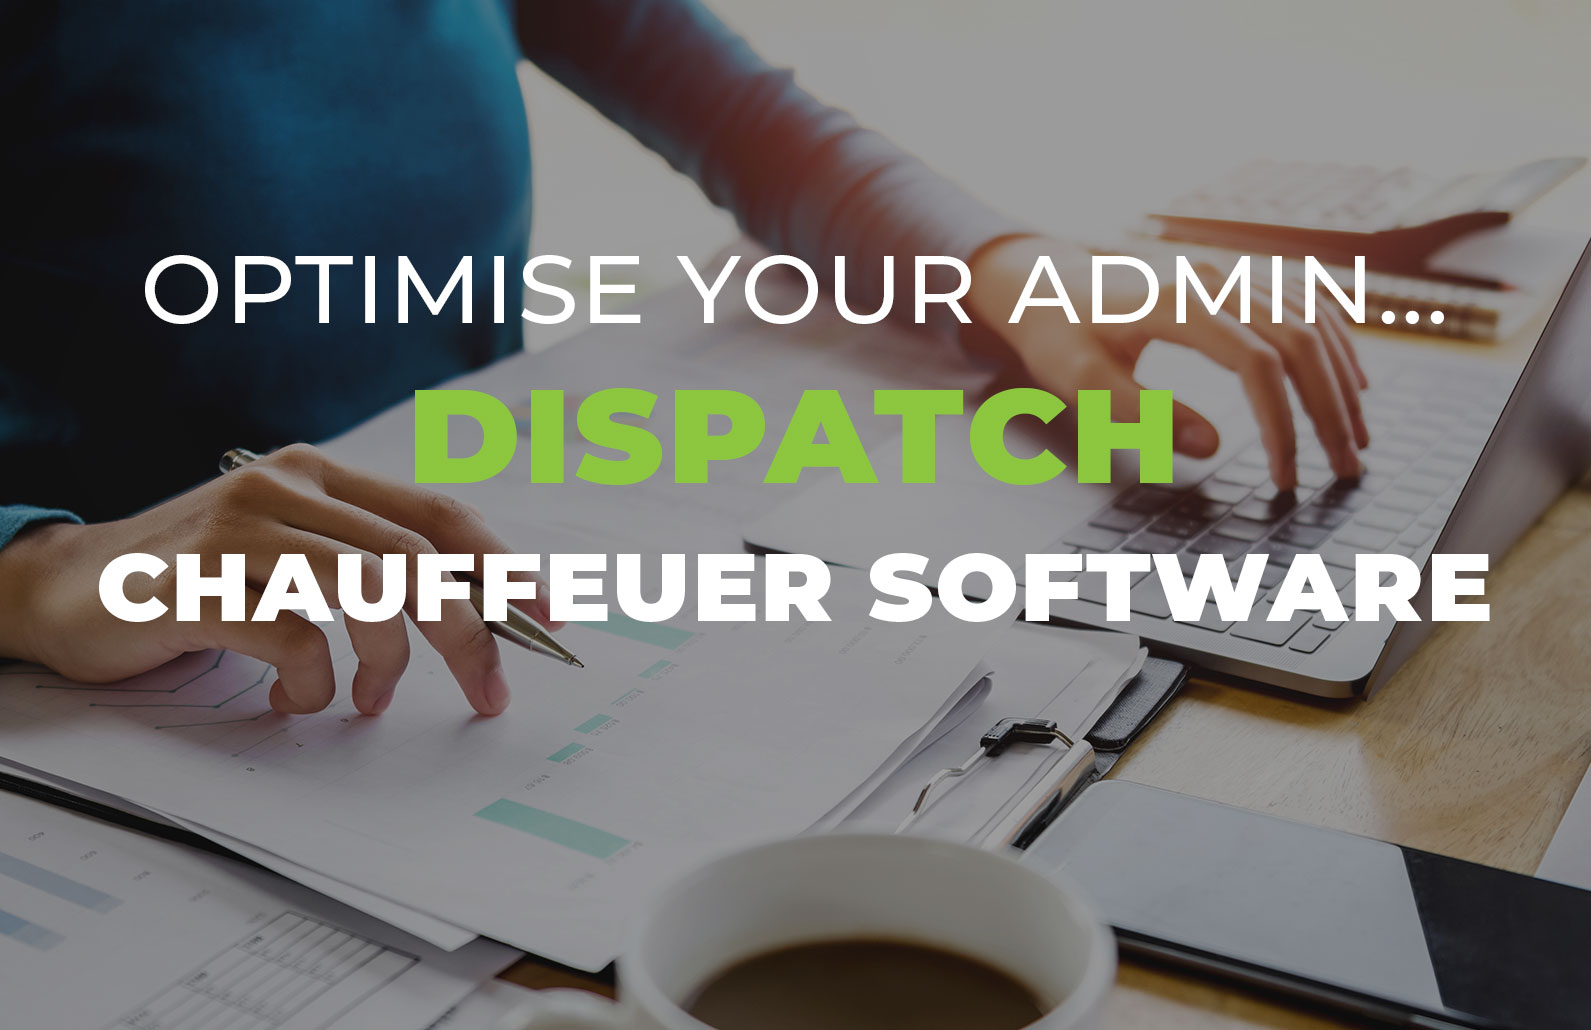 CHAUFFEUER SOFTWARE TO OPTIMISE YOUR ADMIN